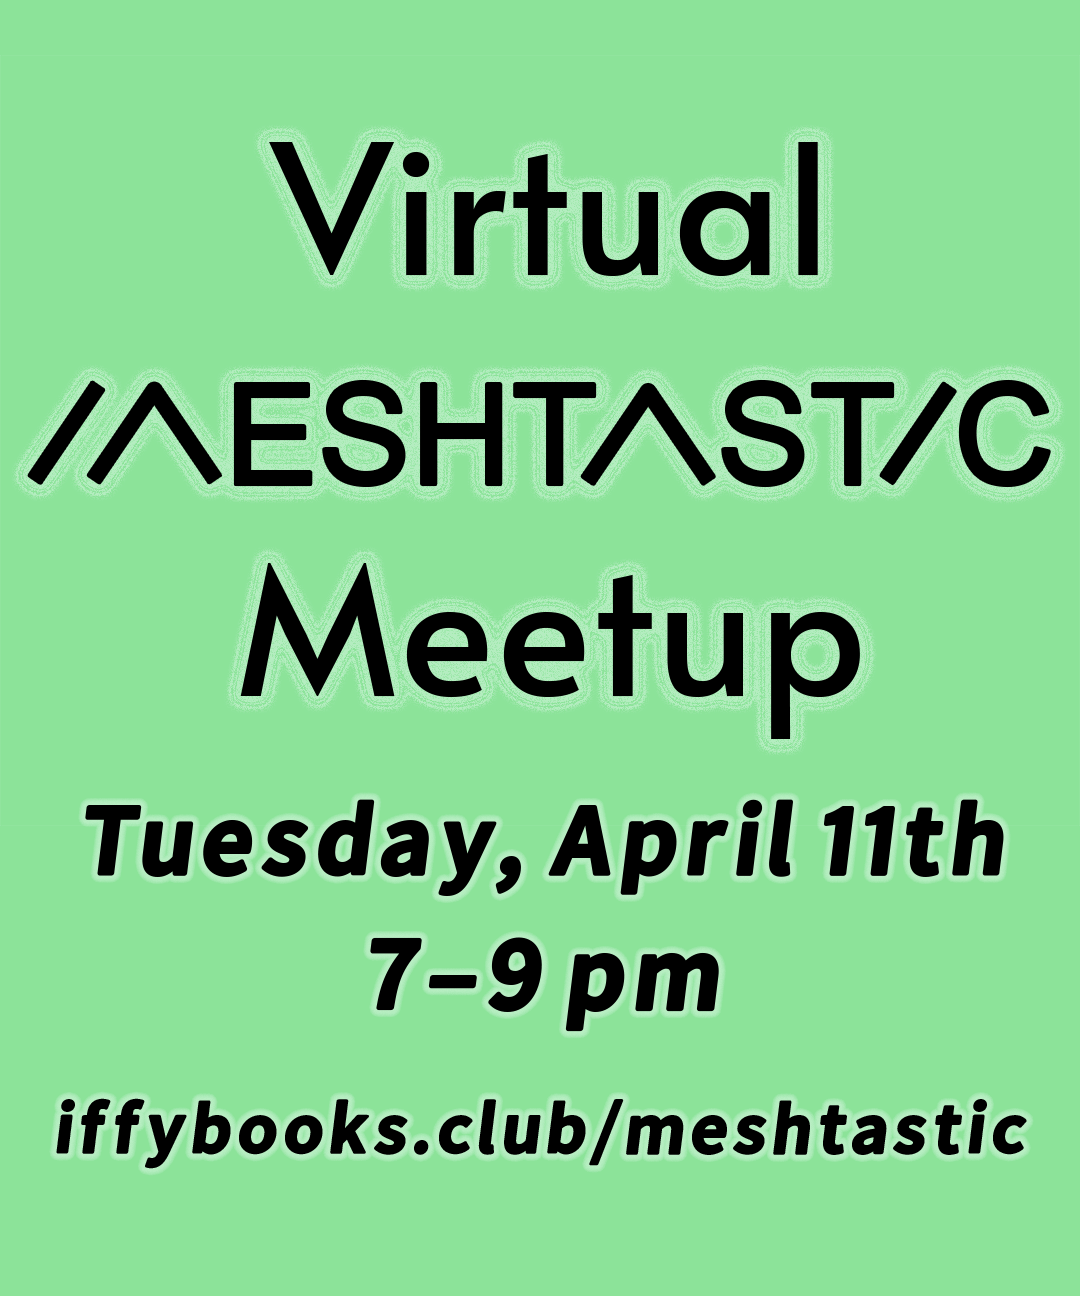 Flyer with the following text in black on a green background: Virtual Meshtastic Meetup Tuesday, April 11th 7–9 p.m. iffybooks.net/meshtastic